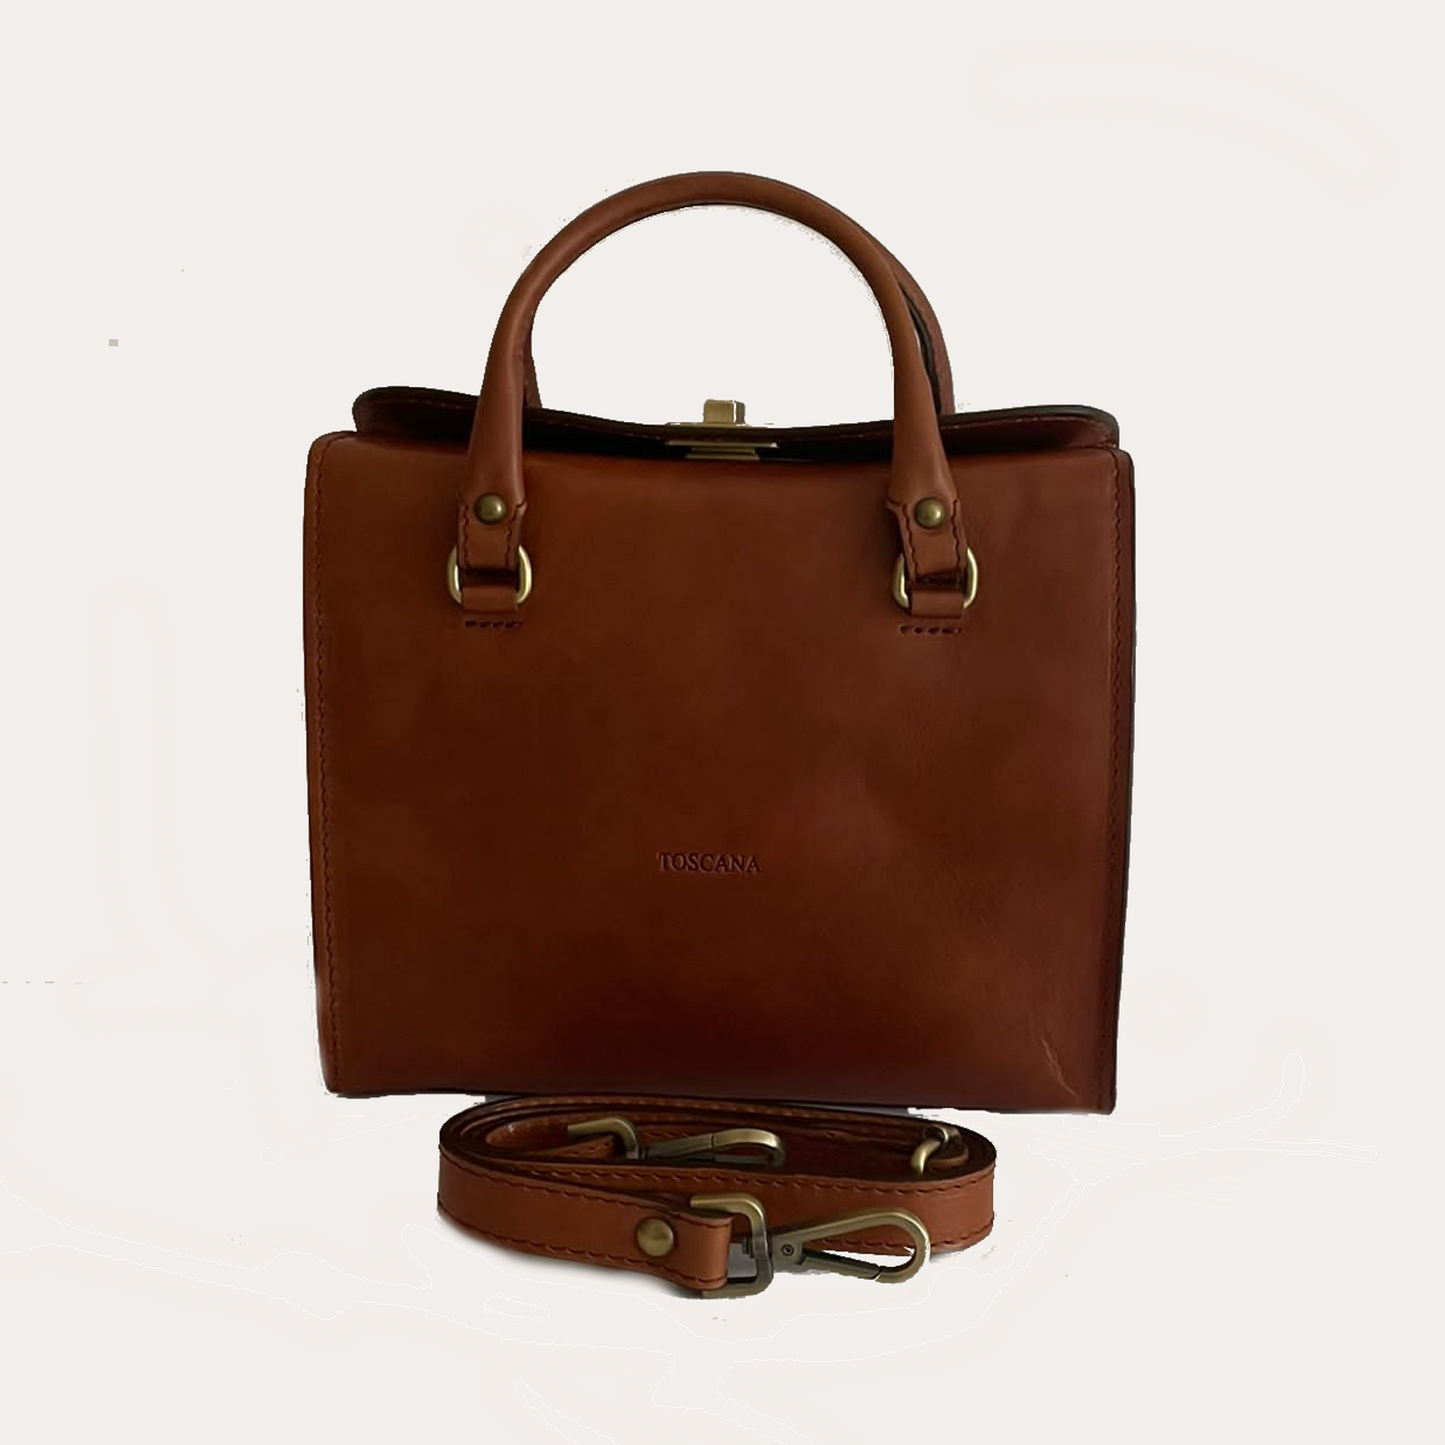 Cognac Leather Bag with Handles